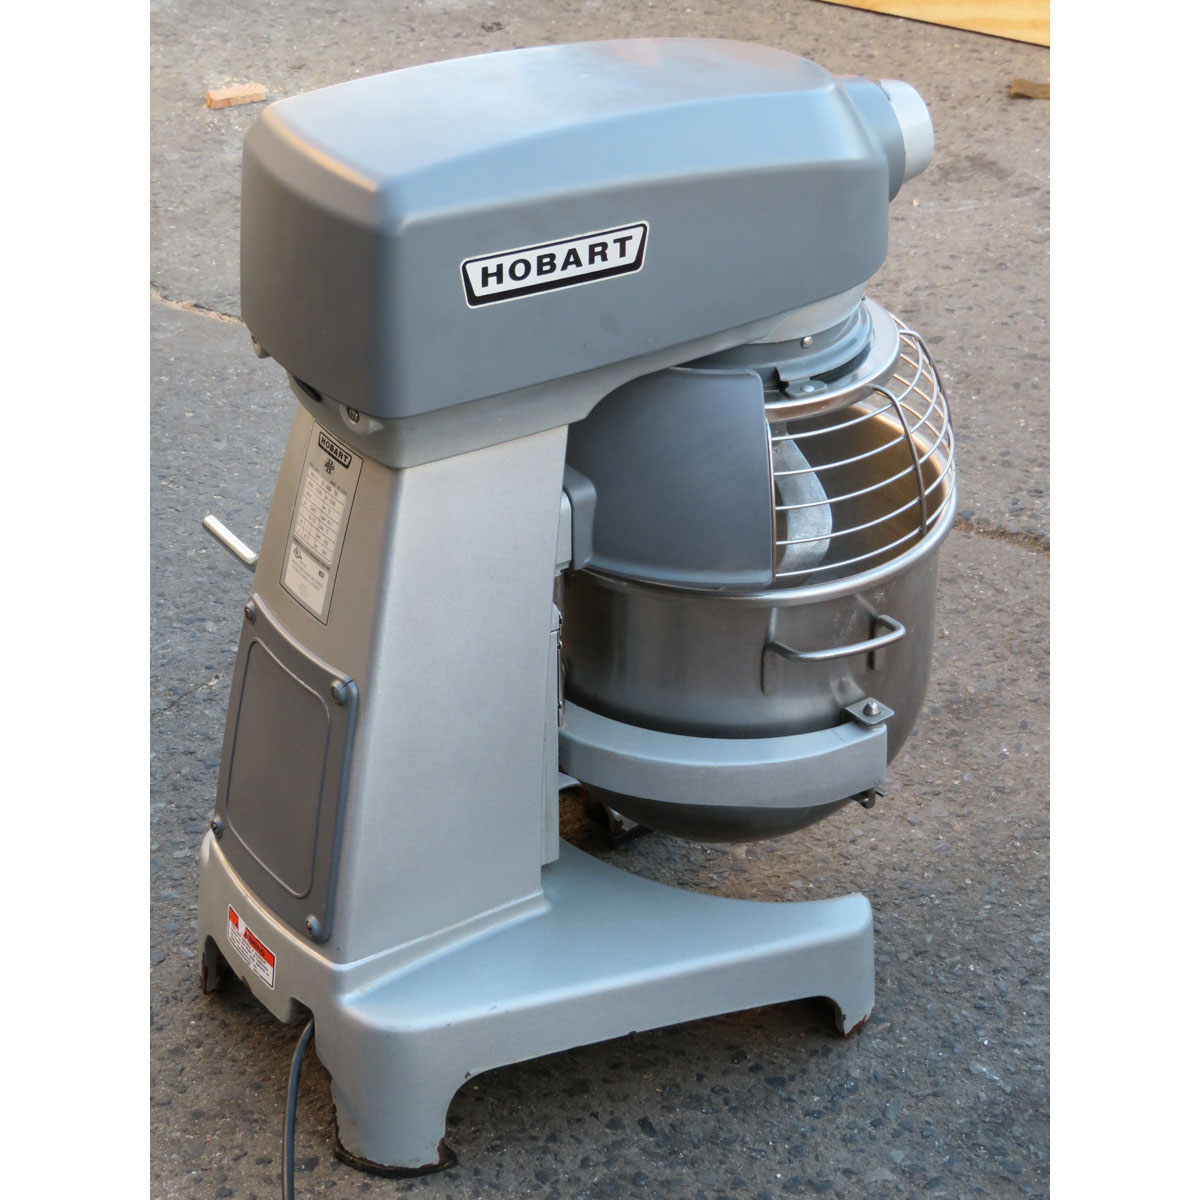 Hobart Legacy 20 Quart HL200 Legacy Mixer, Used Excellent Condition image 1